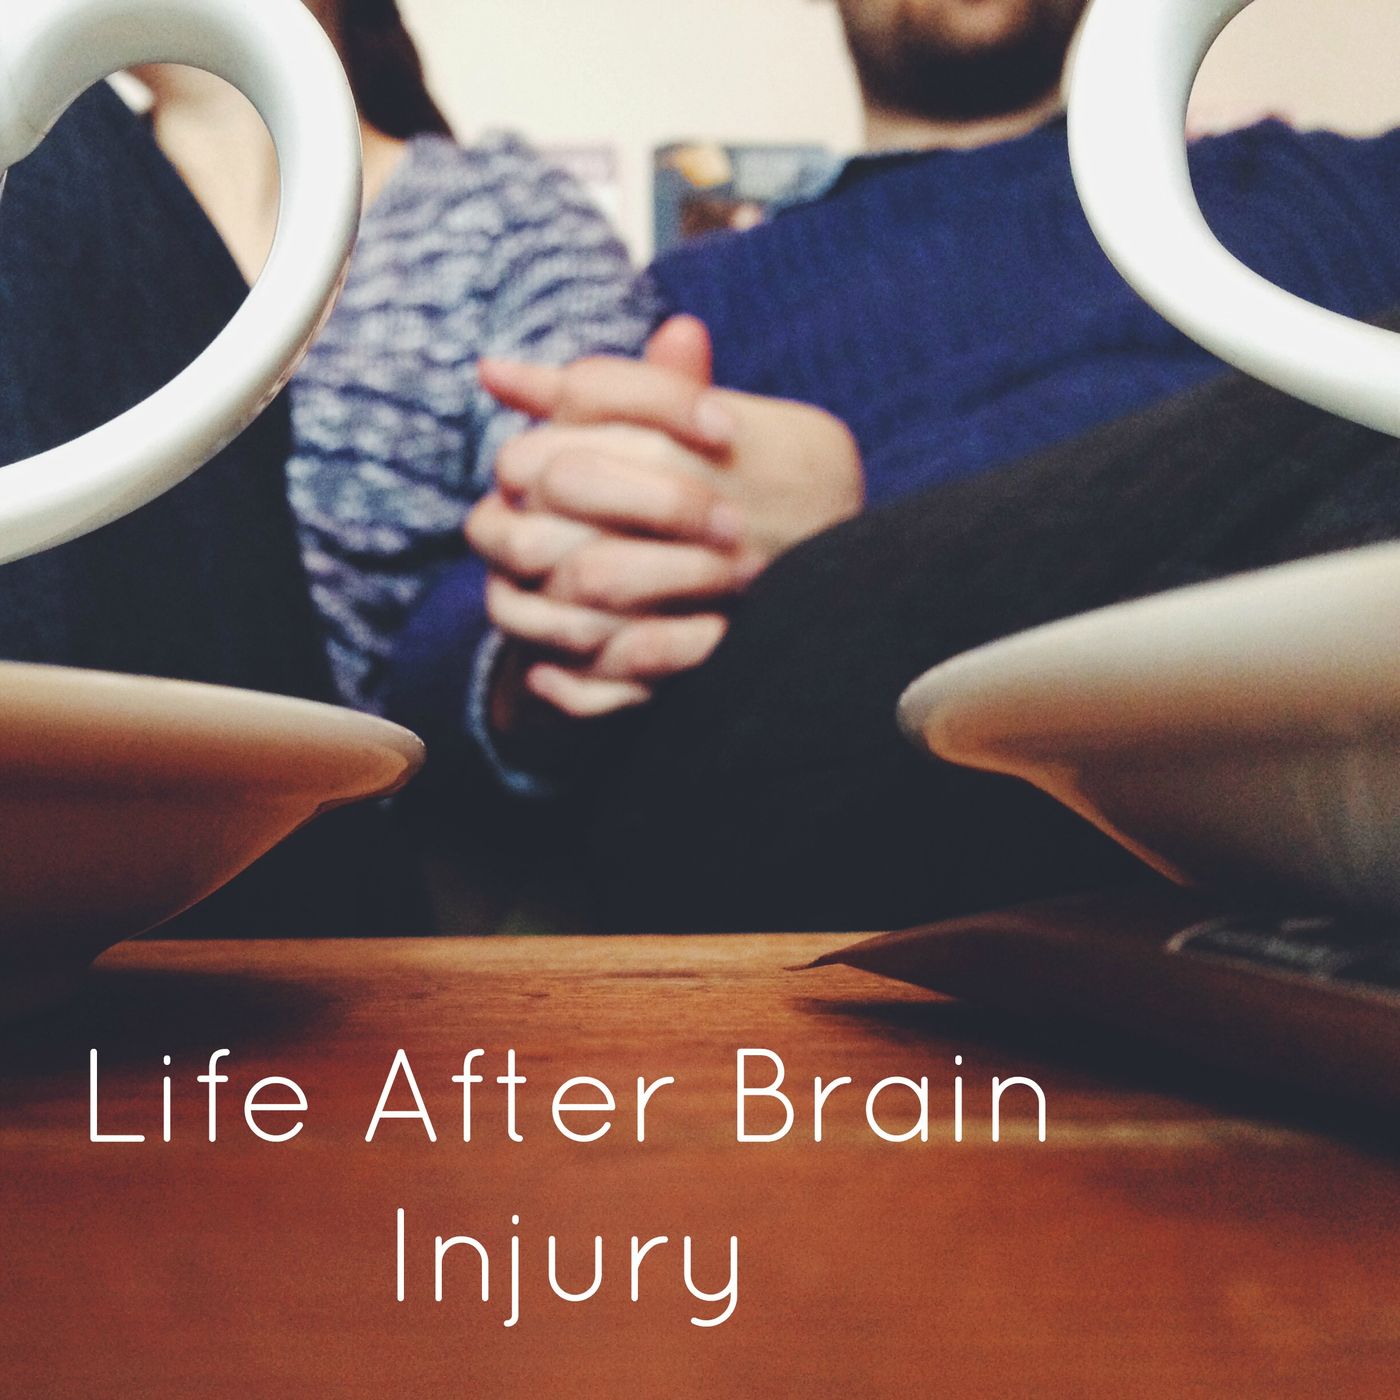 Life After Brain Injury - Trailer